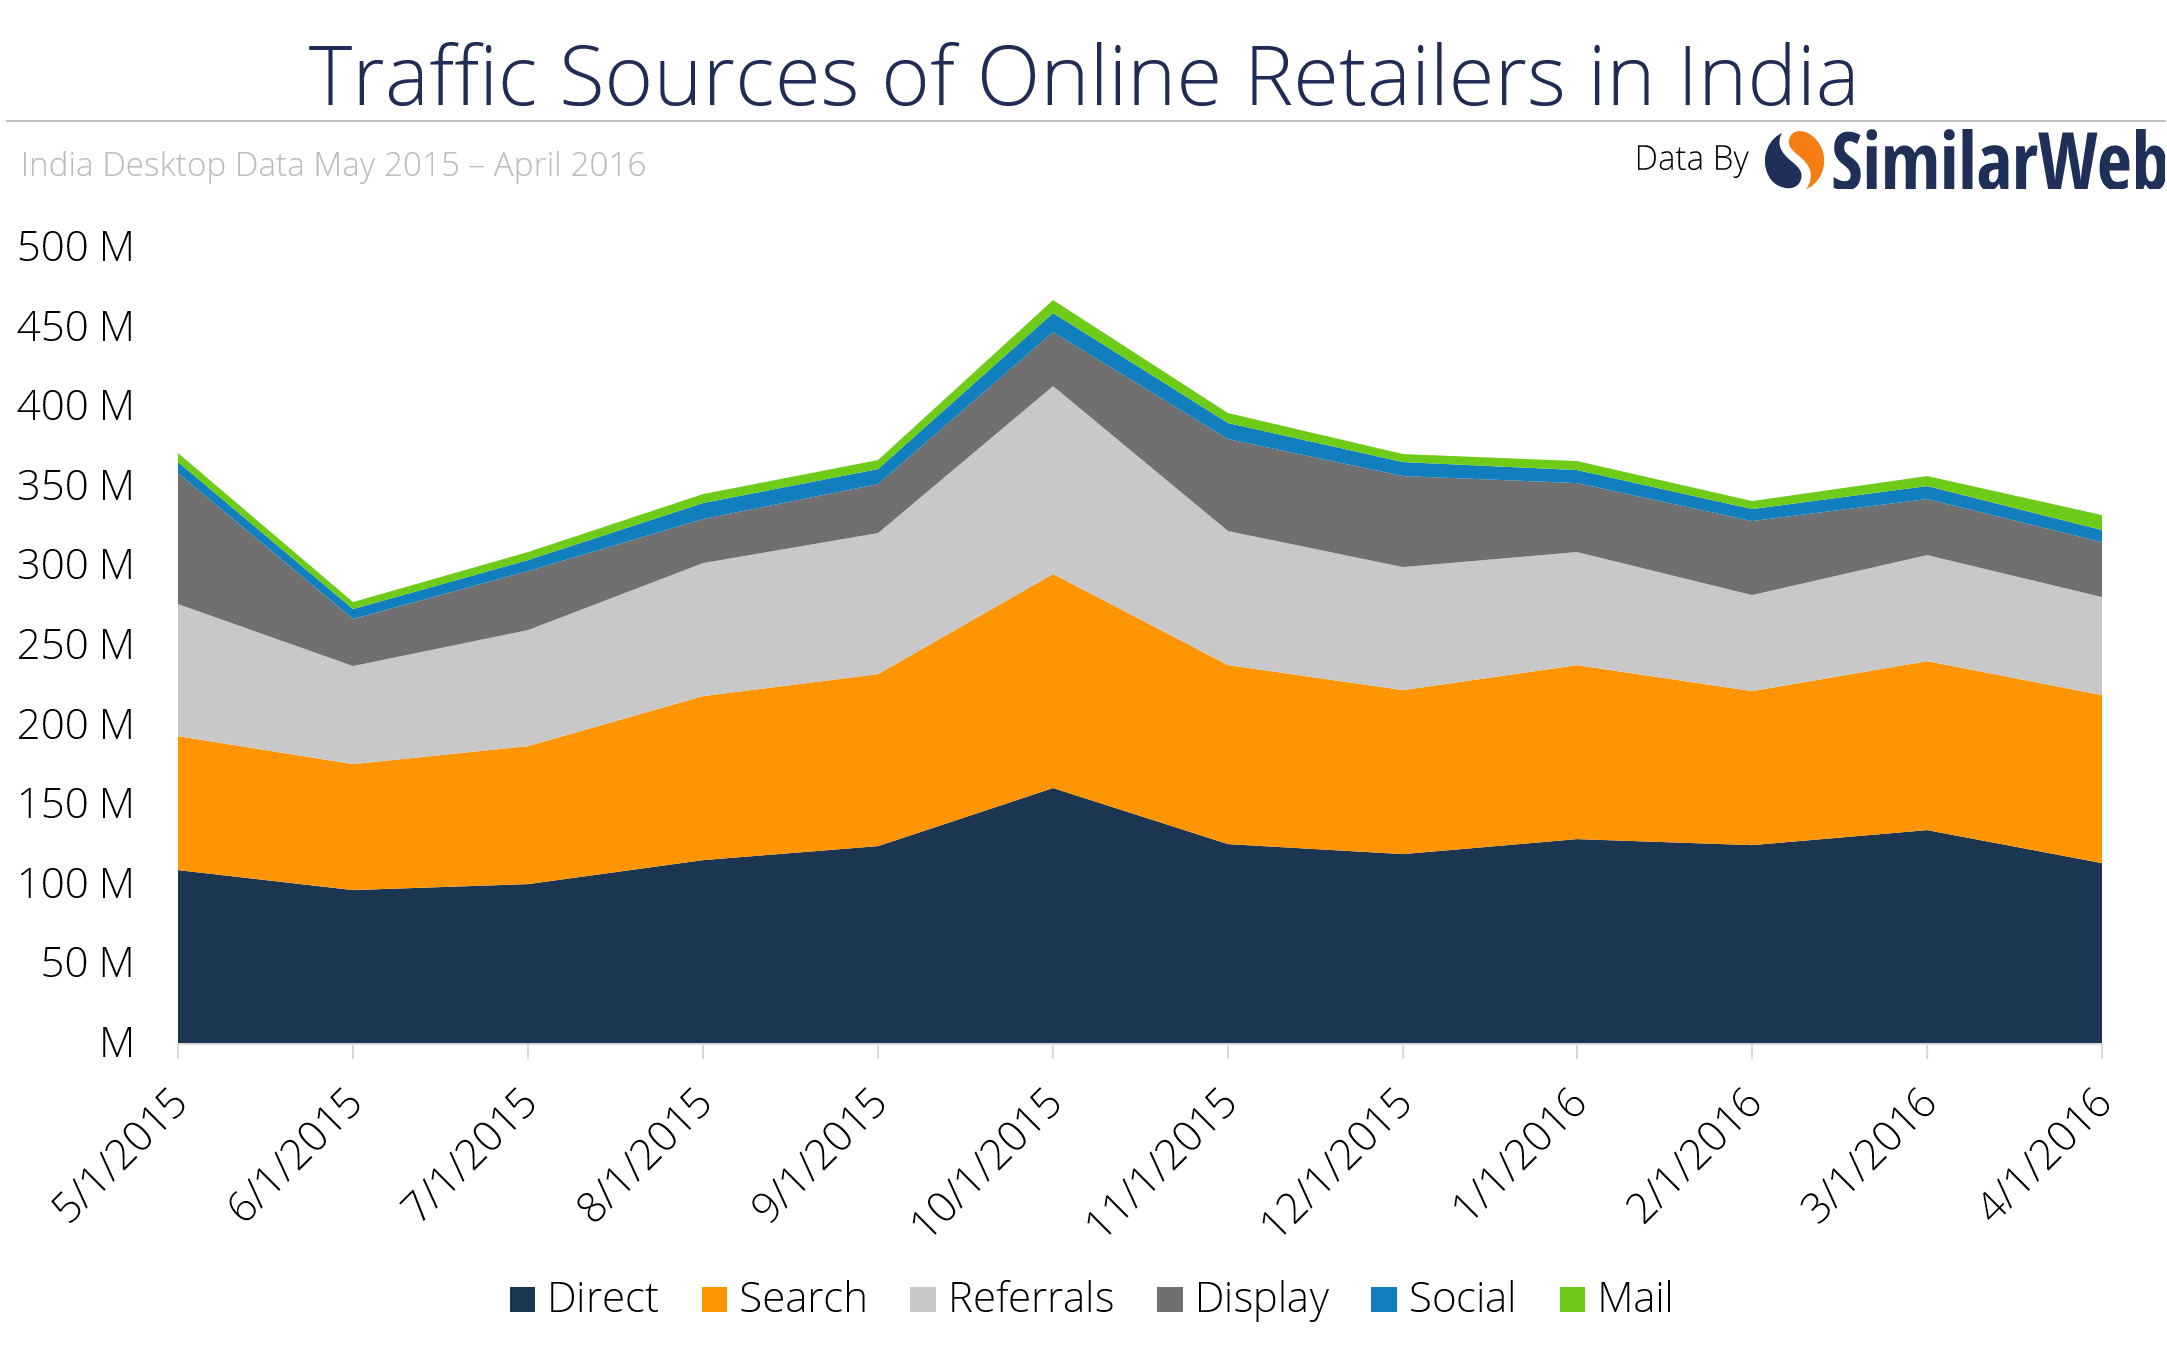 Traffic sources graph of online retailers in India